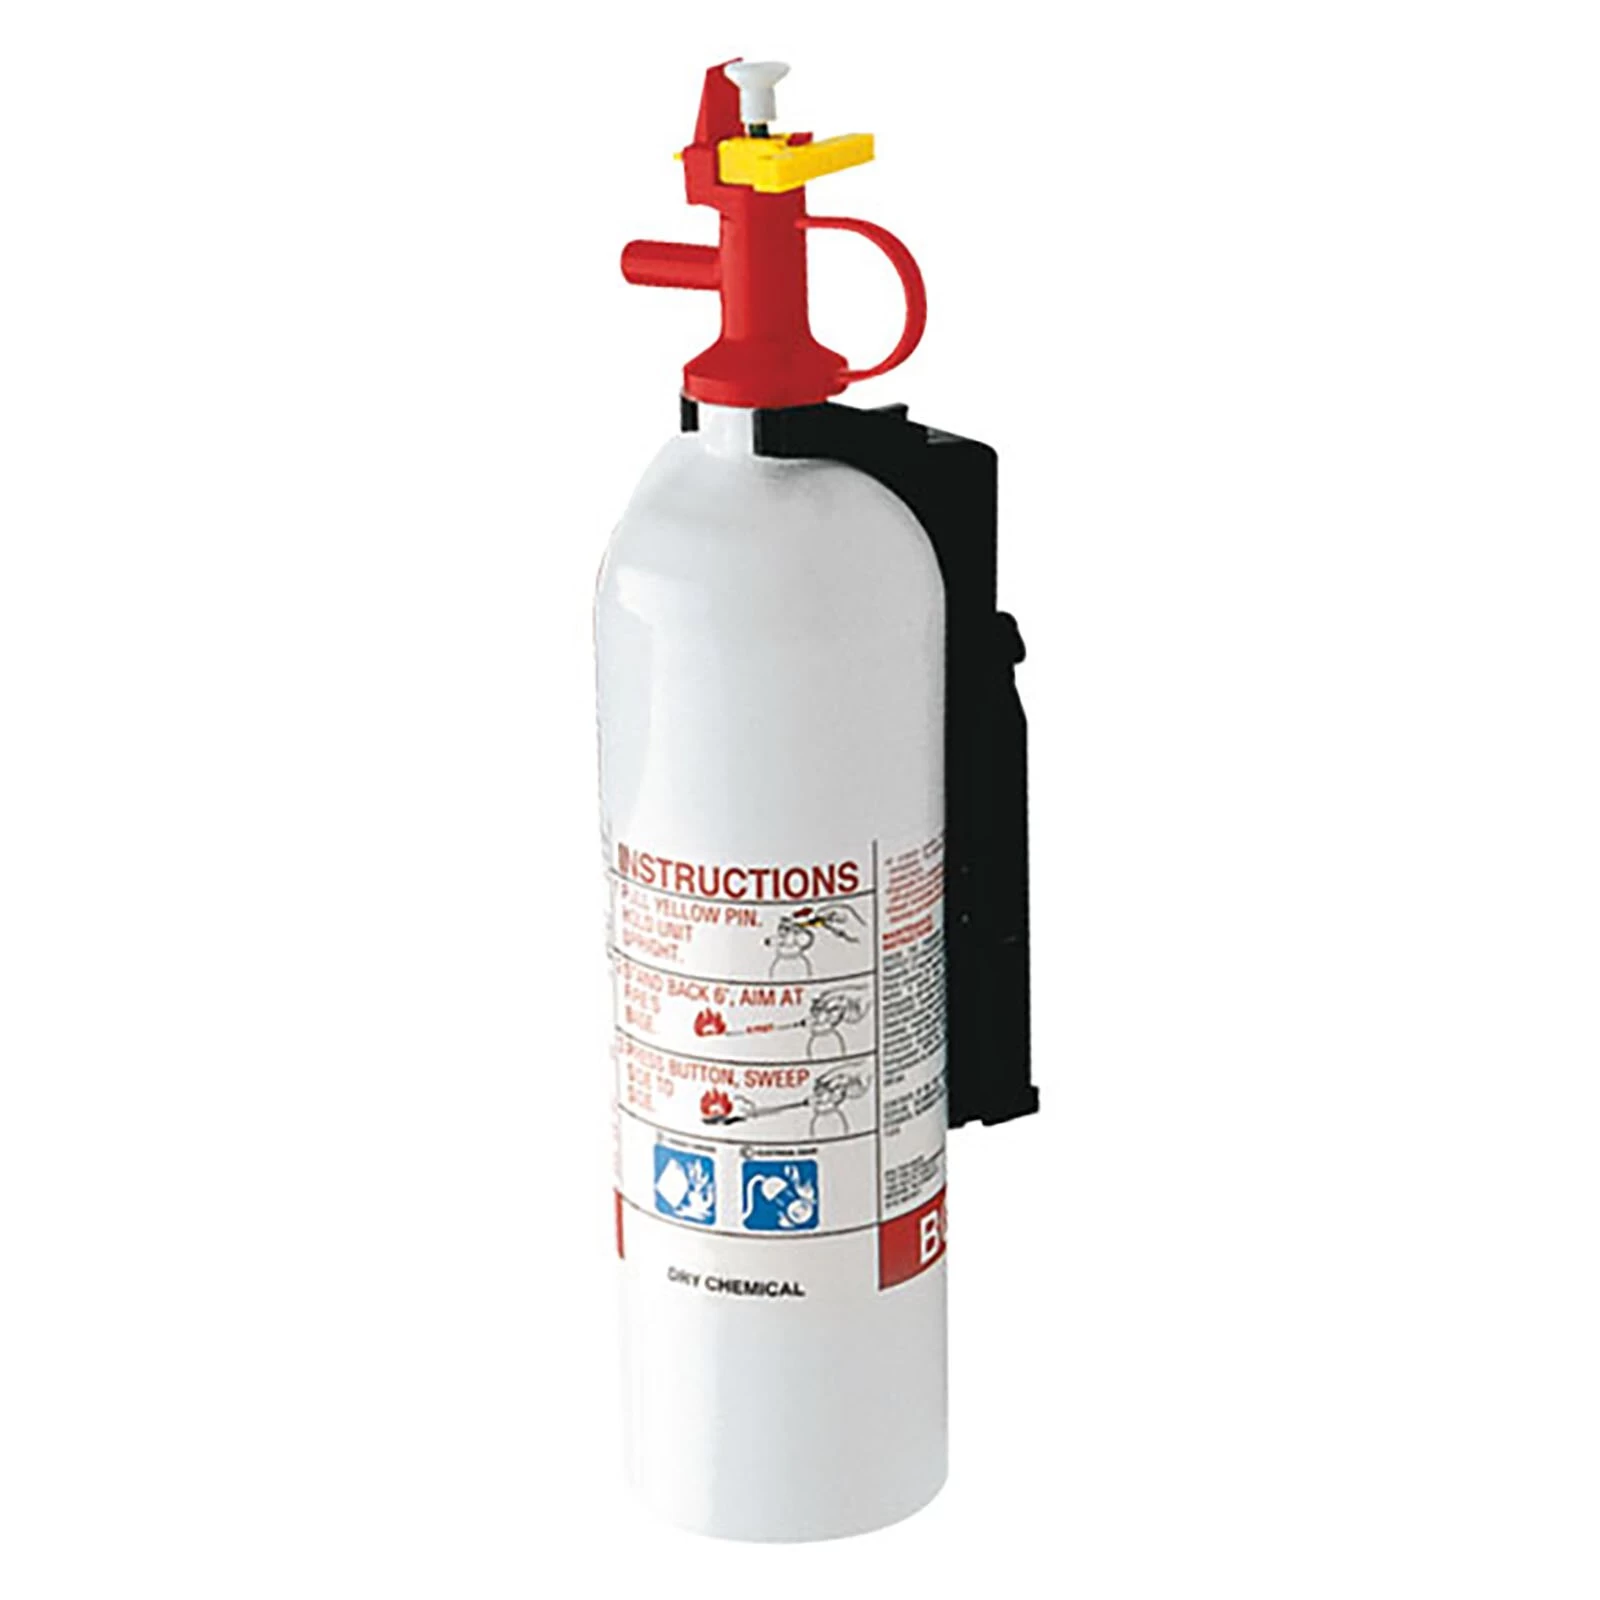 Can-am Bombardier Fire Extinguisher